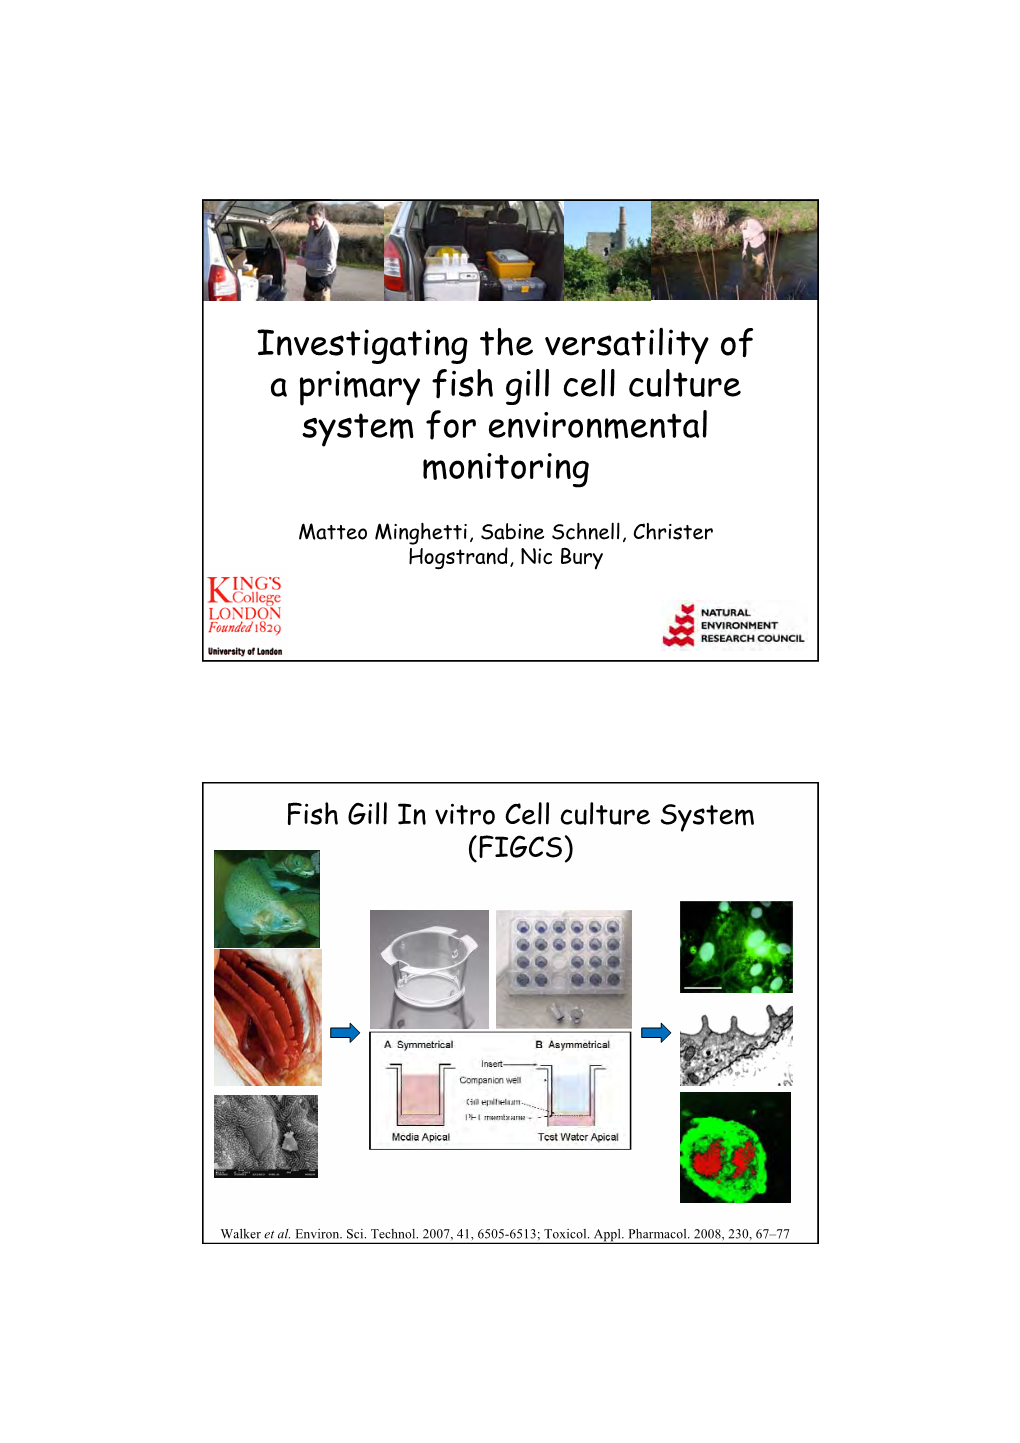 Investigating the Versatility of a Primary Fish Gill Cell Culture System for Environmental Monitoring